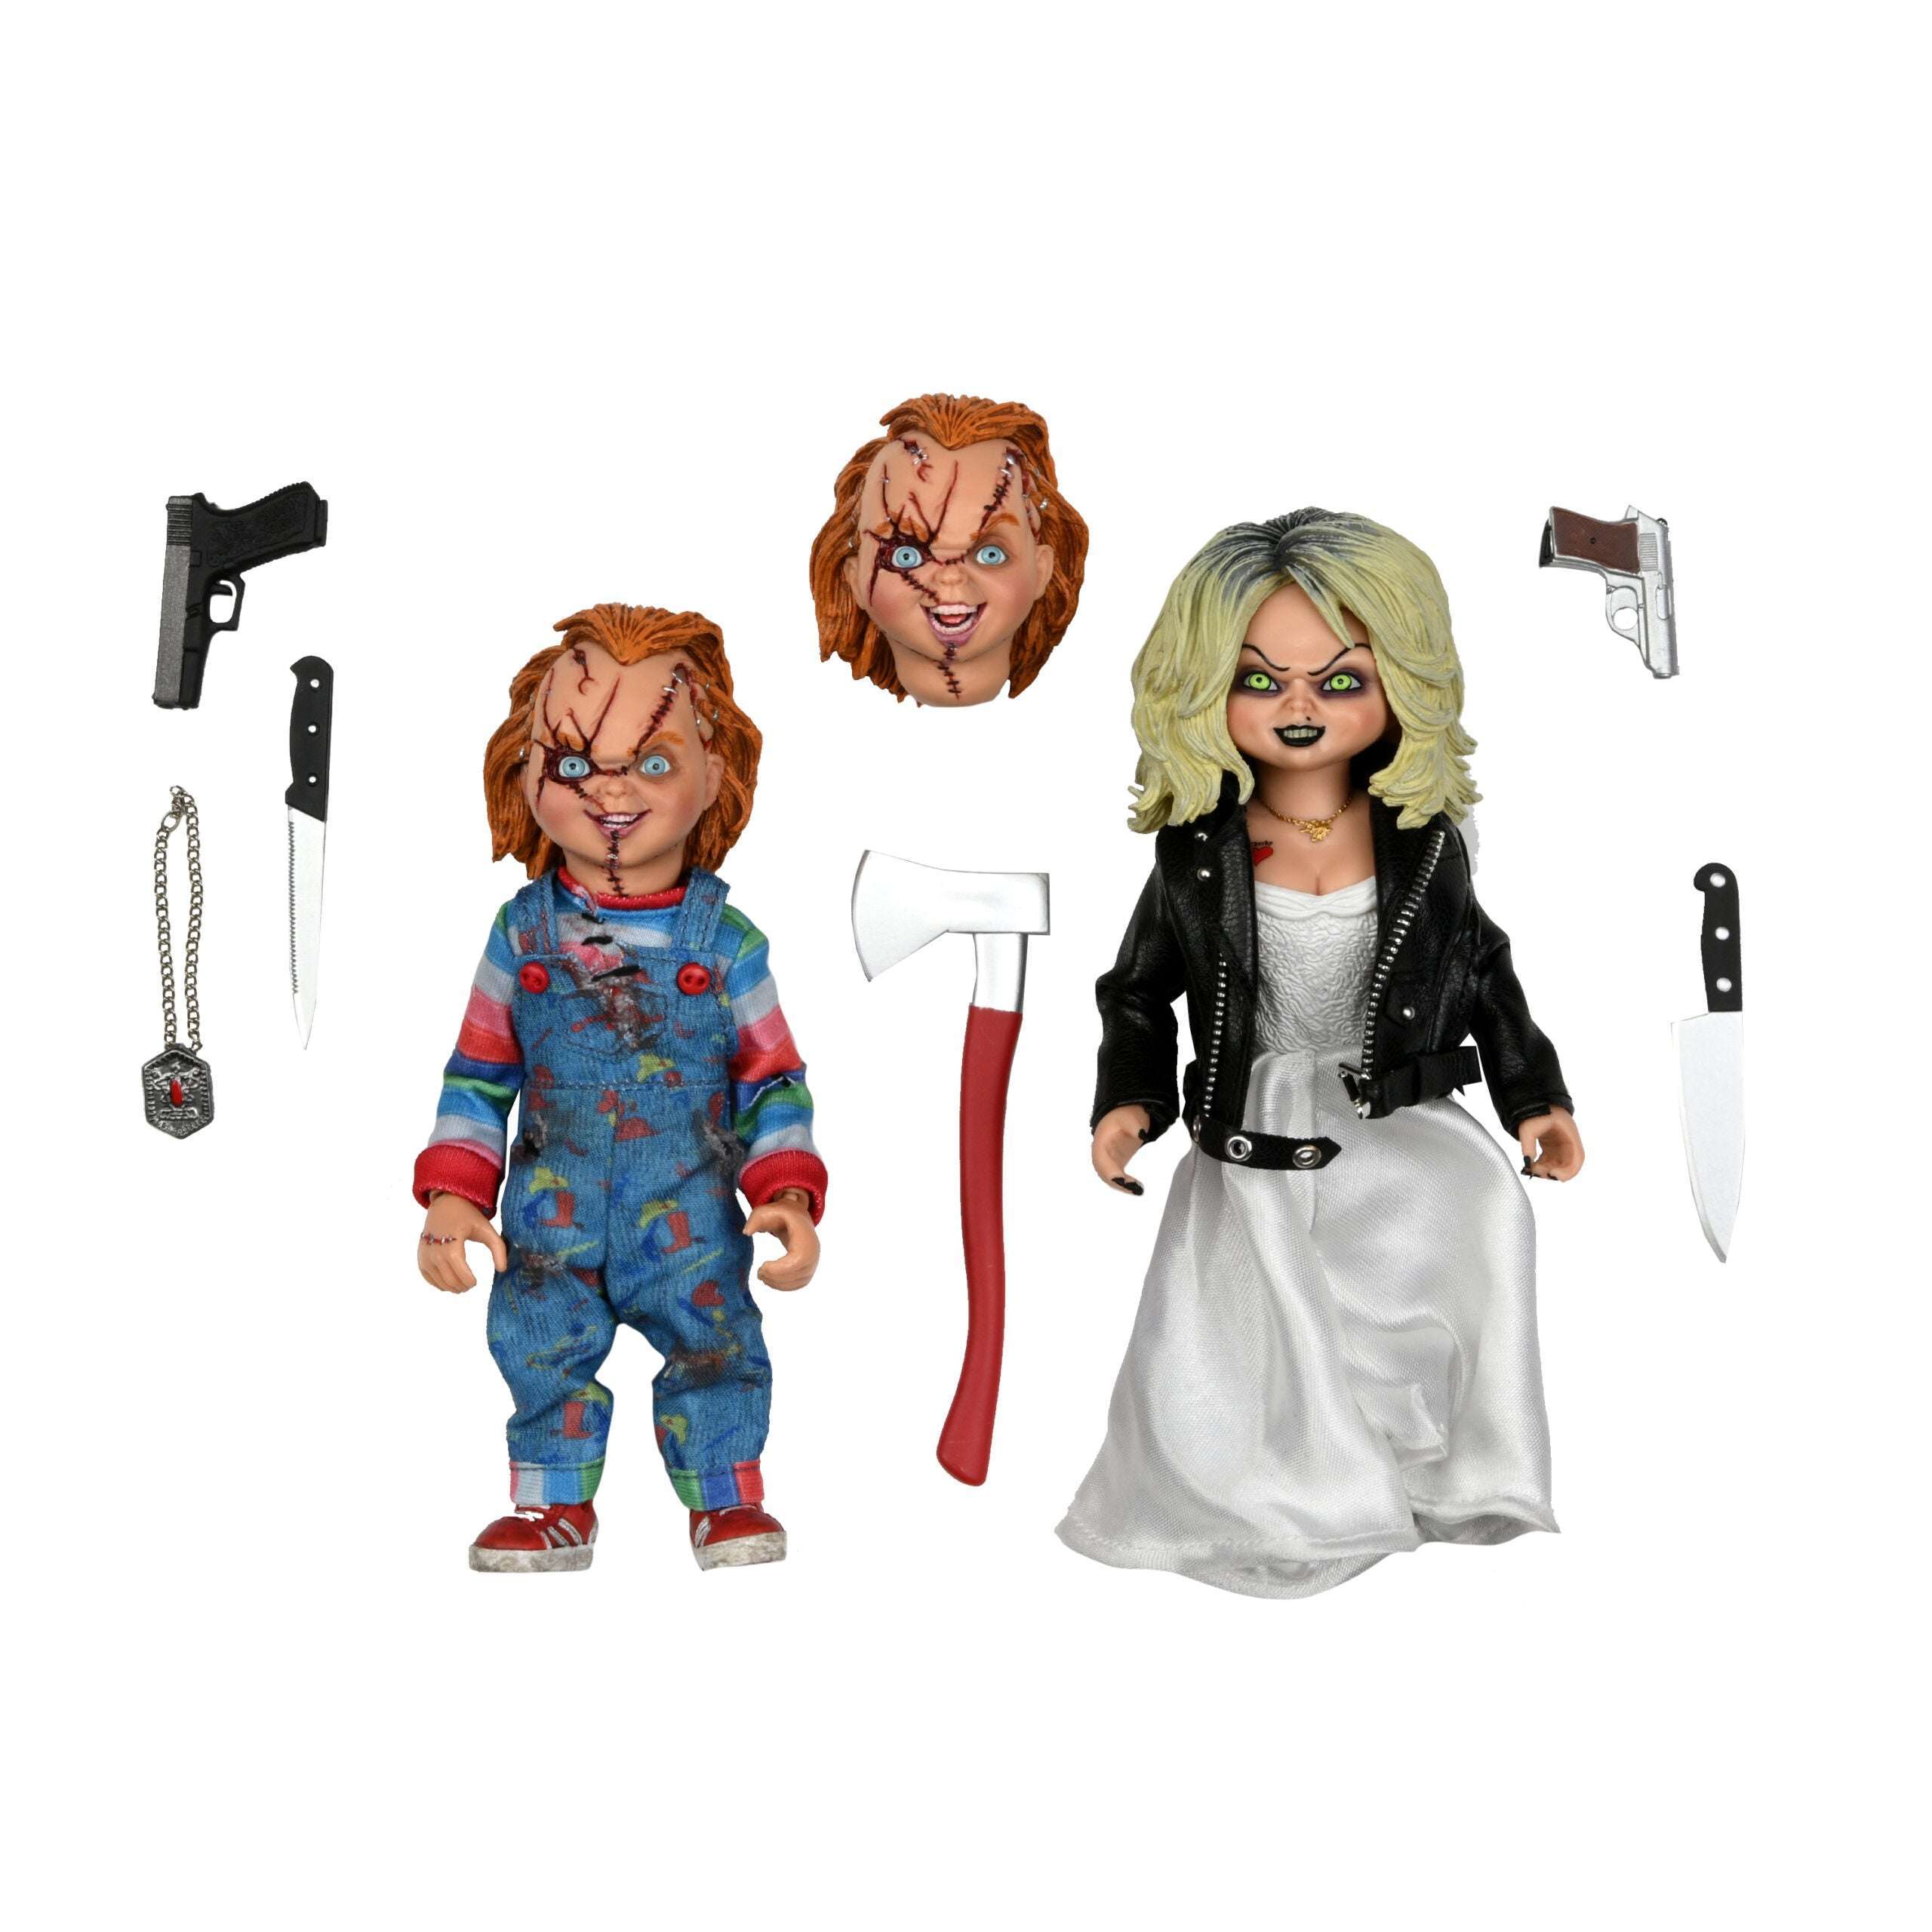 Bride of Chucky – 8″ Scale Clothed Figure – Chucky & Tiffany 2-Pack Co